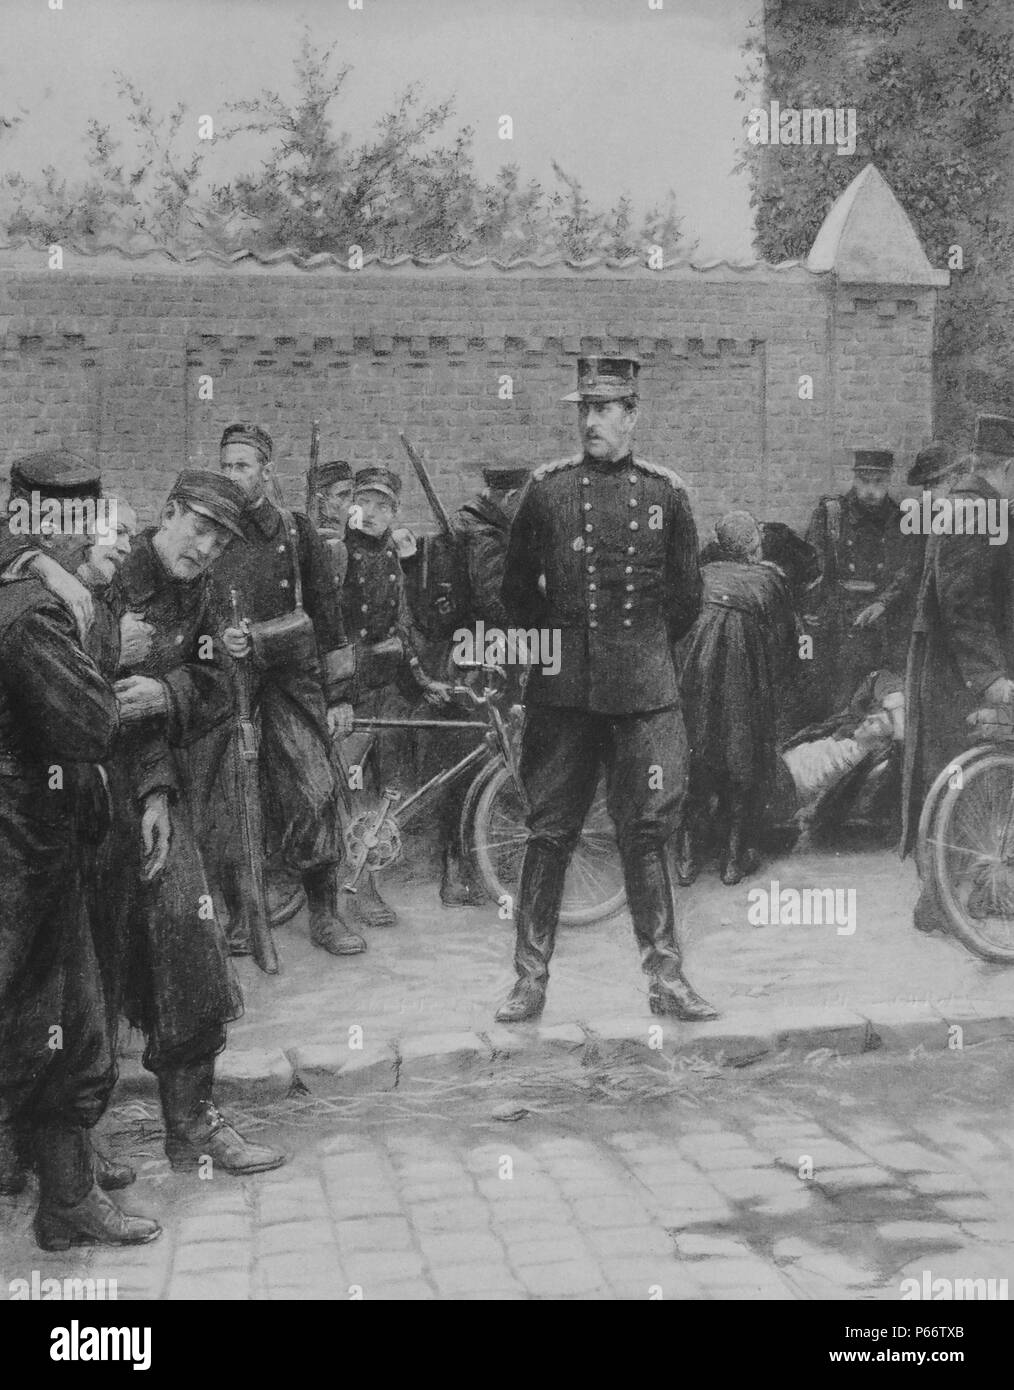 King Albert I of Belgium observes wounded Belgian soldiers as they arrive for treatment in military hospital Stock Photo